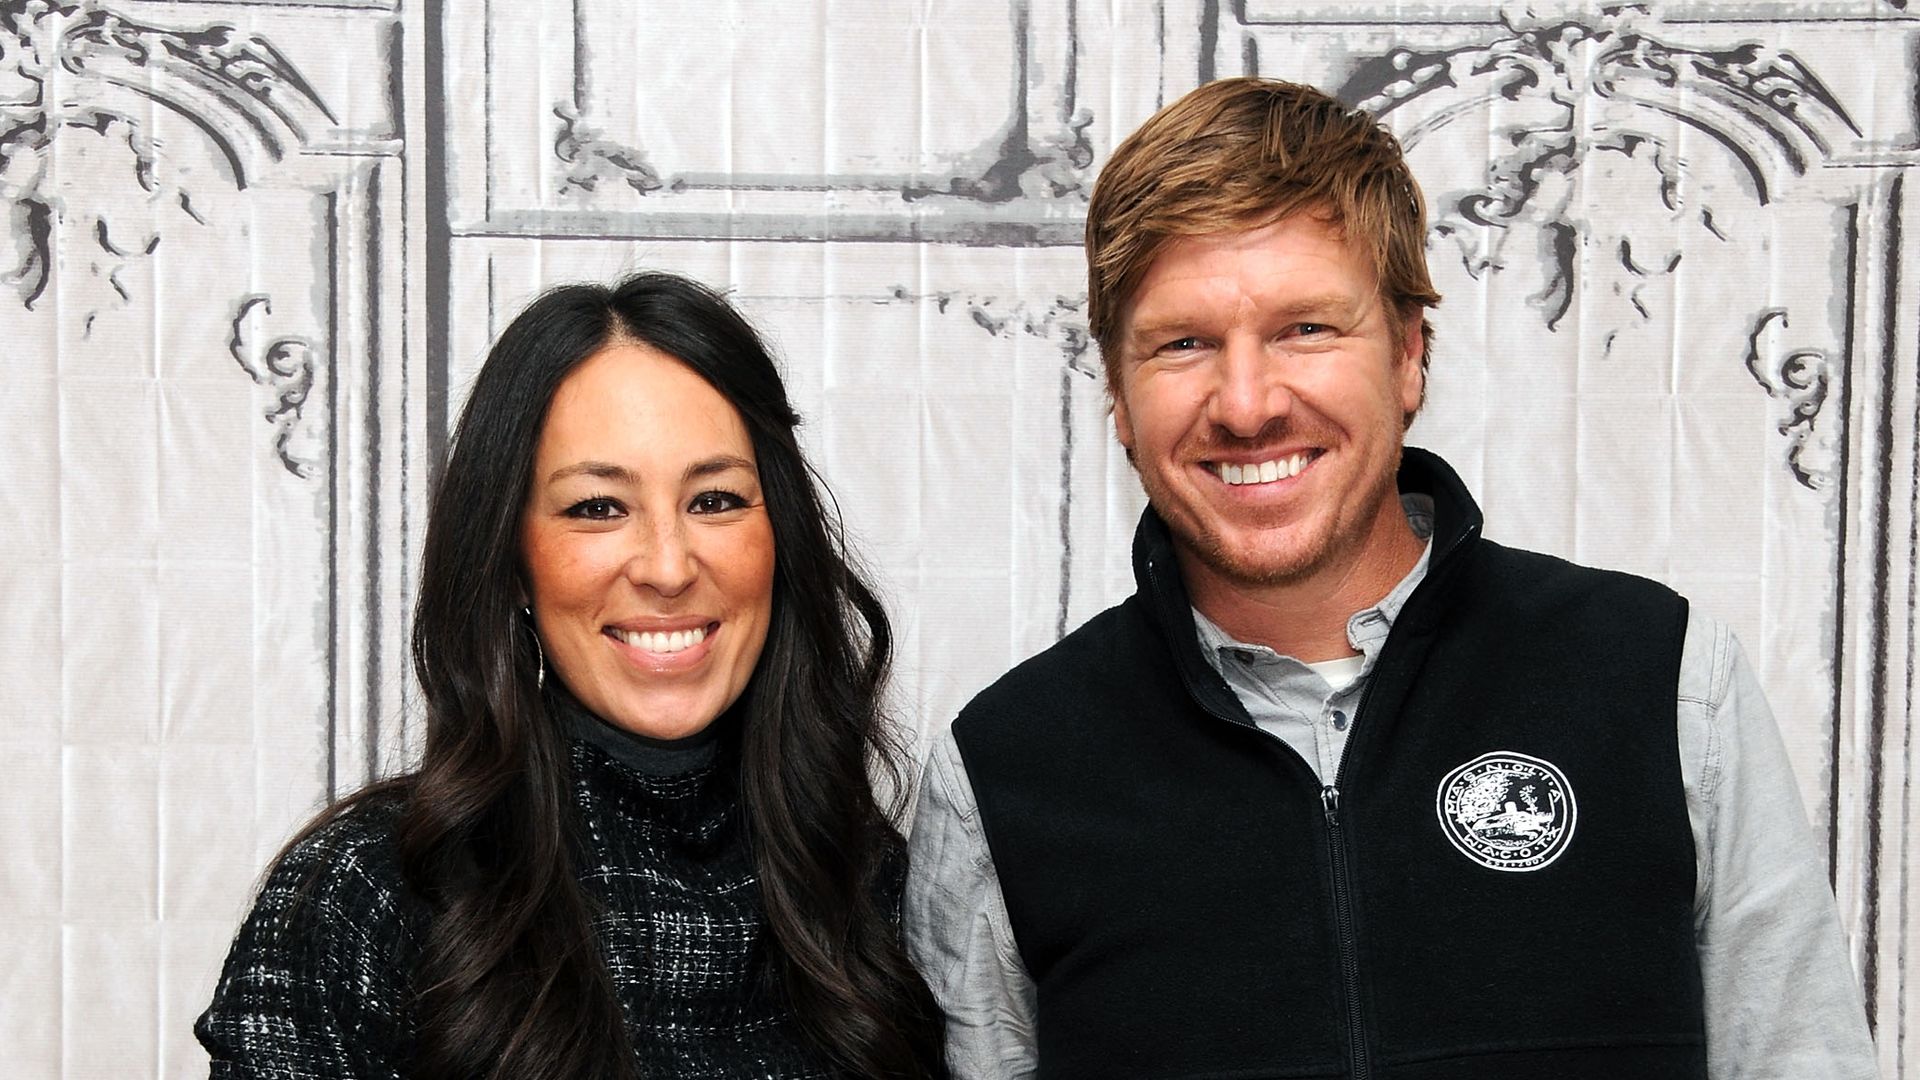 Designers Joanna Gaines and Chip Gaines attend AOL Build Presents: "Fixer Upper" at AOL Studios In New York on December 8, 2015 in New York City.